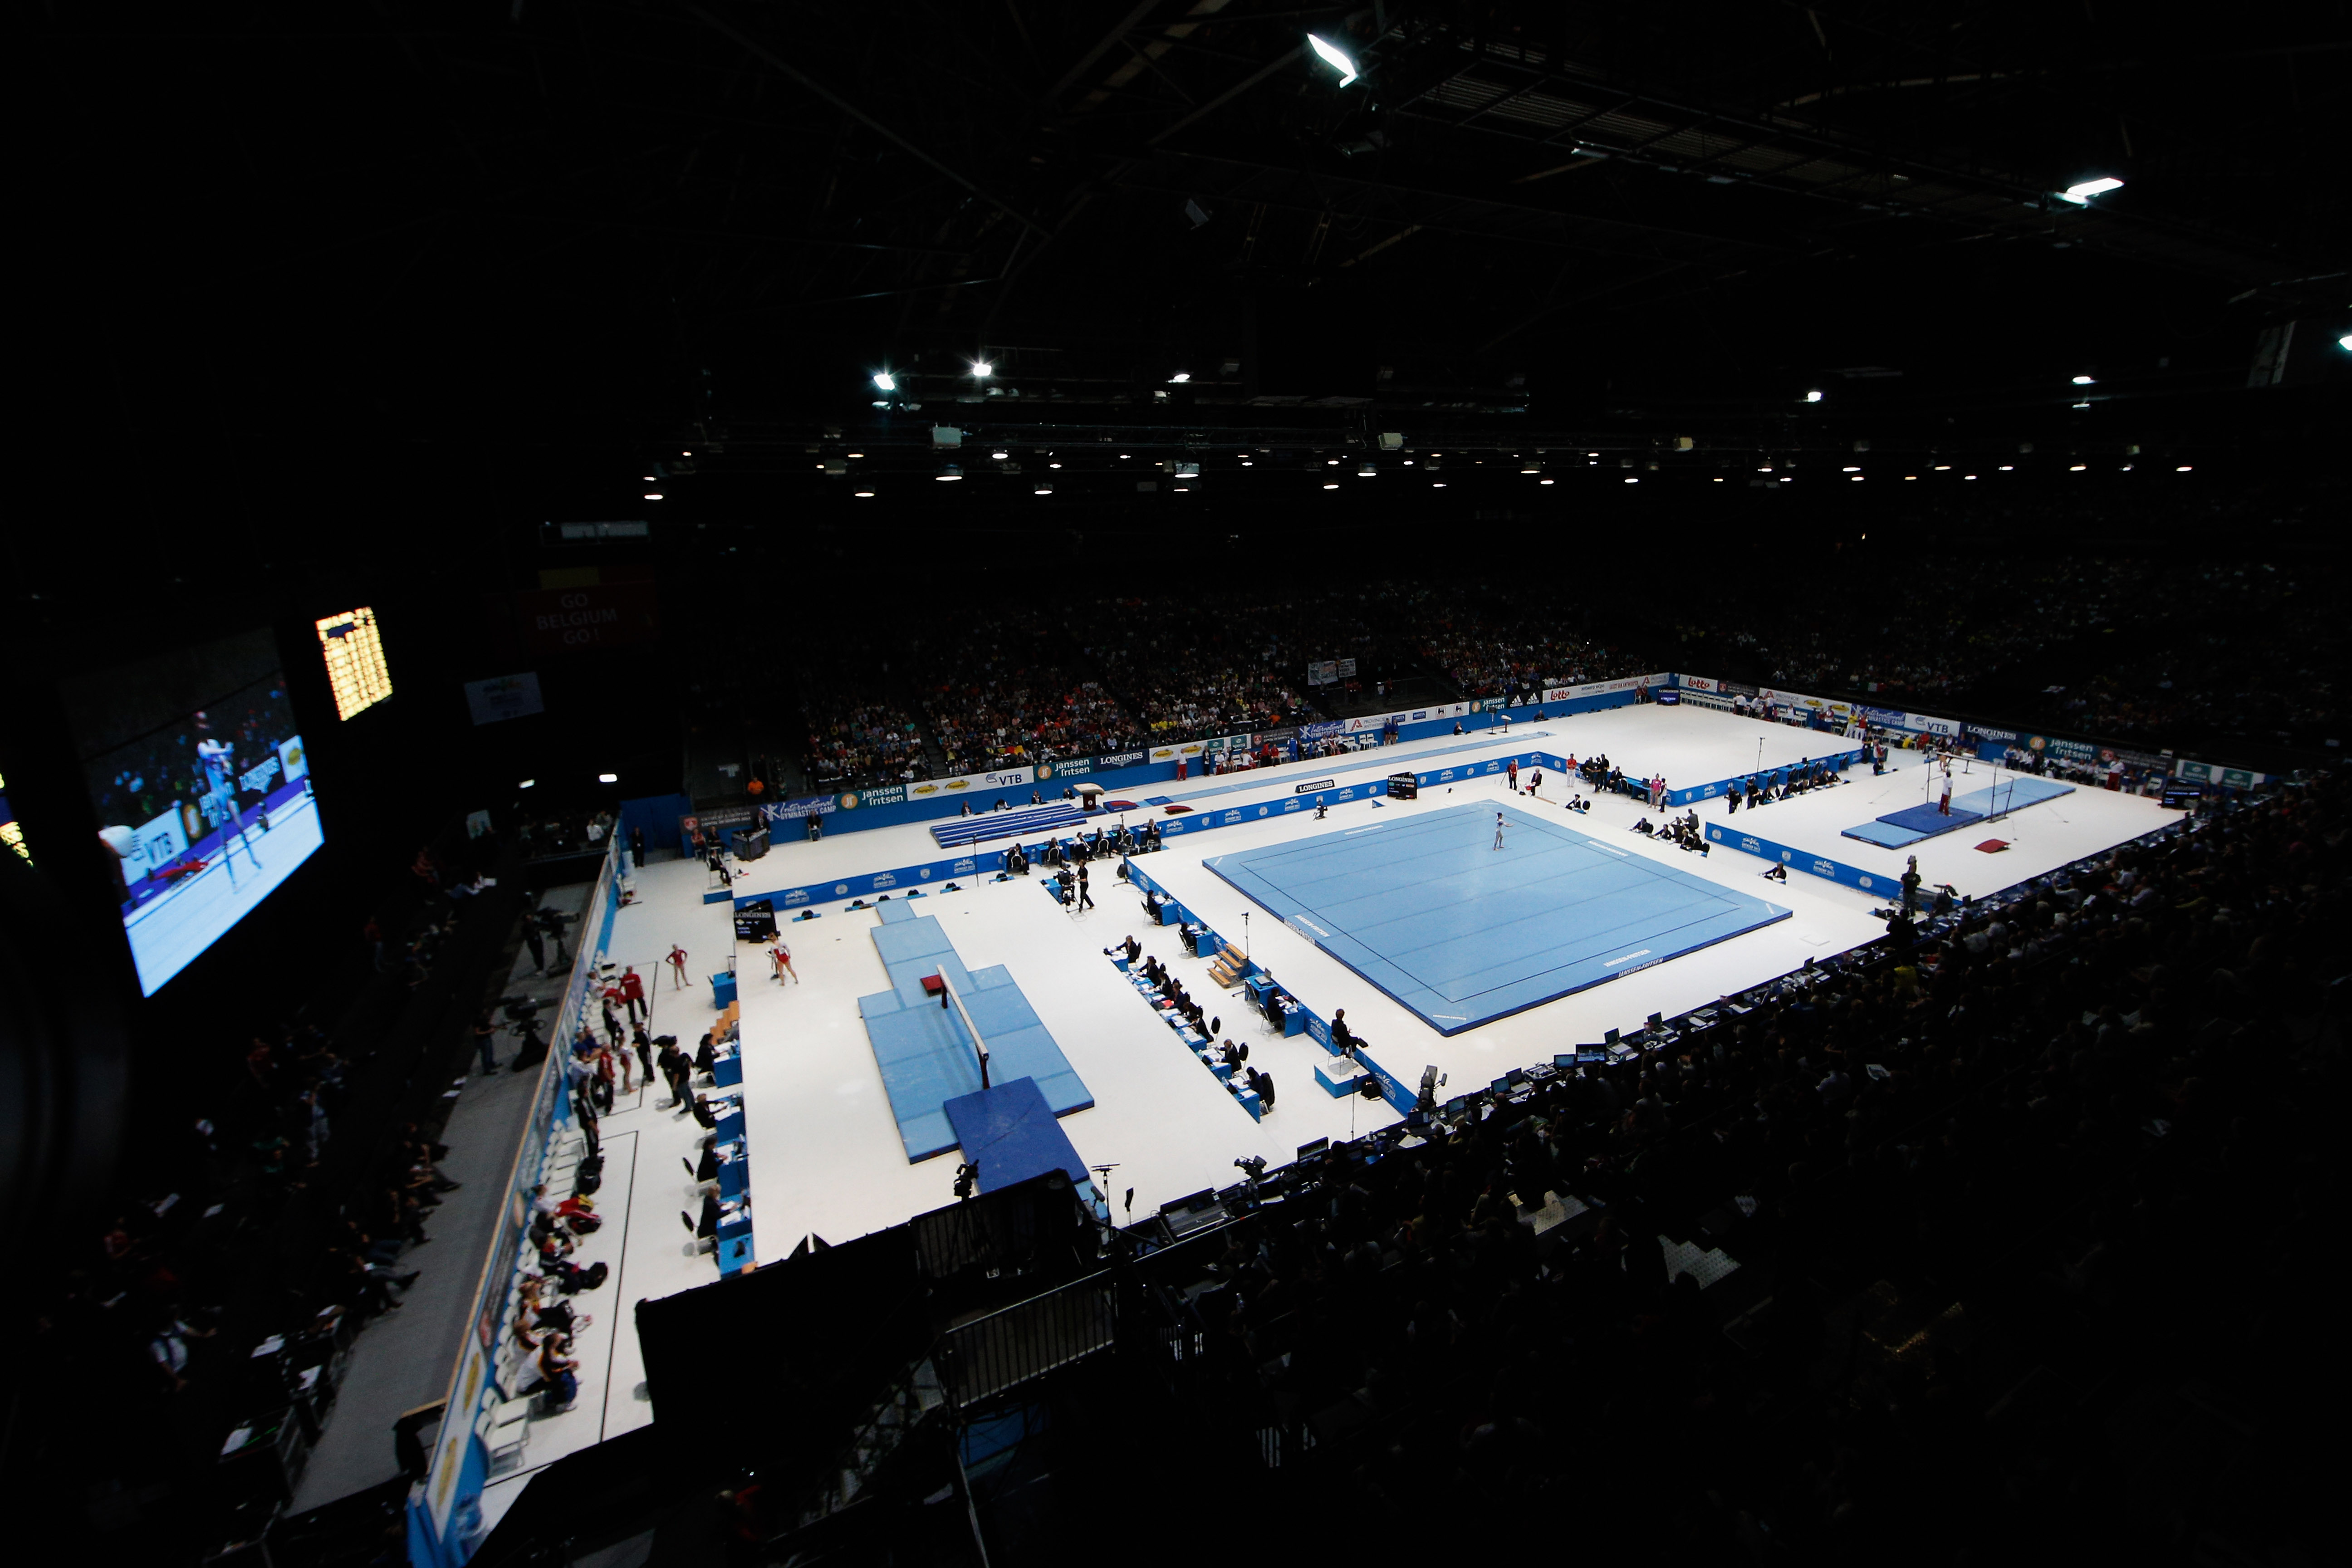 A general view during the Womens All-Round Final on Day Five of the Artistic Gymnastics World Championships Belgium 2013 held at the Antwerp Sports Palace on October 4, 2013 in Antwerpen, Belgium.